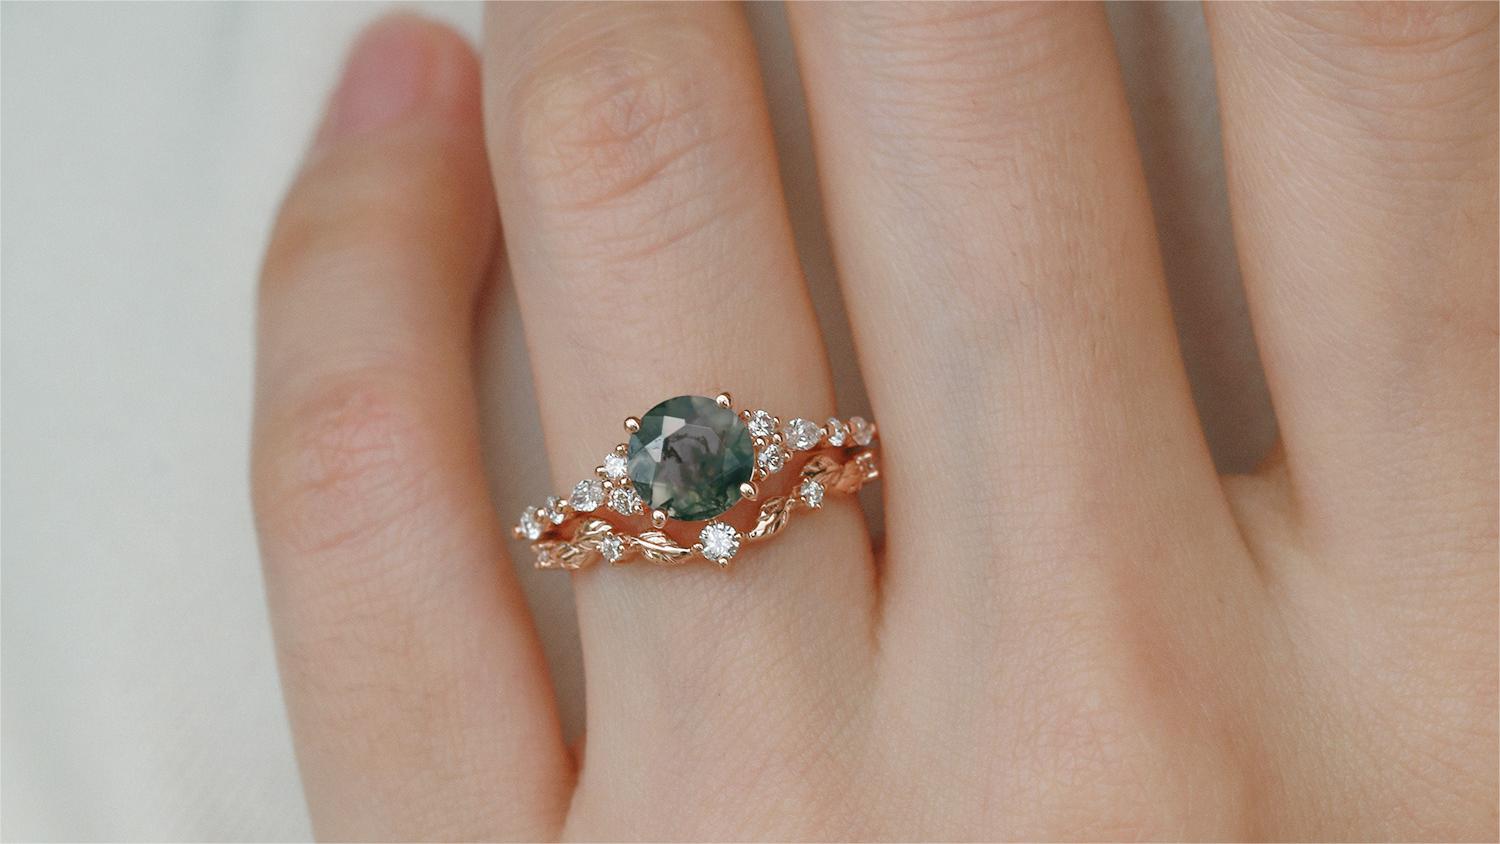 Are Vintage Women's Engagement Rings Making a Comeback?